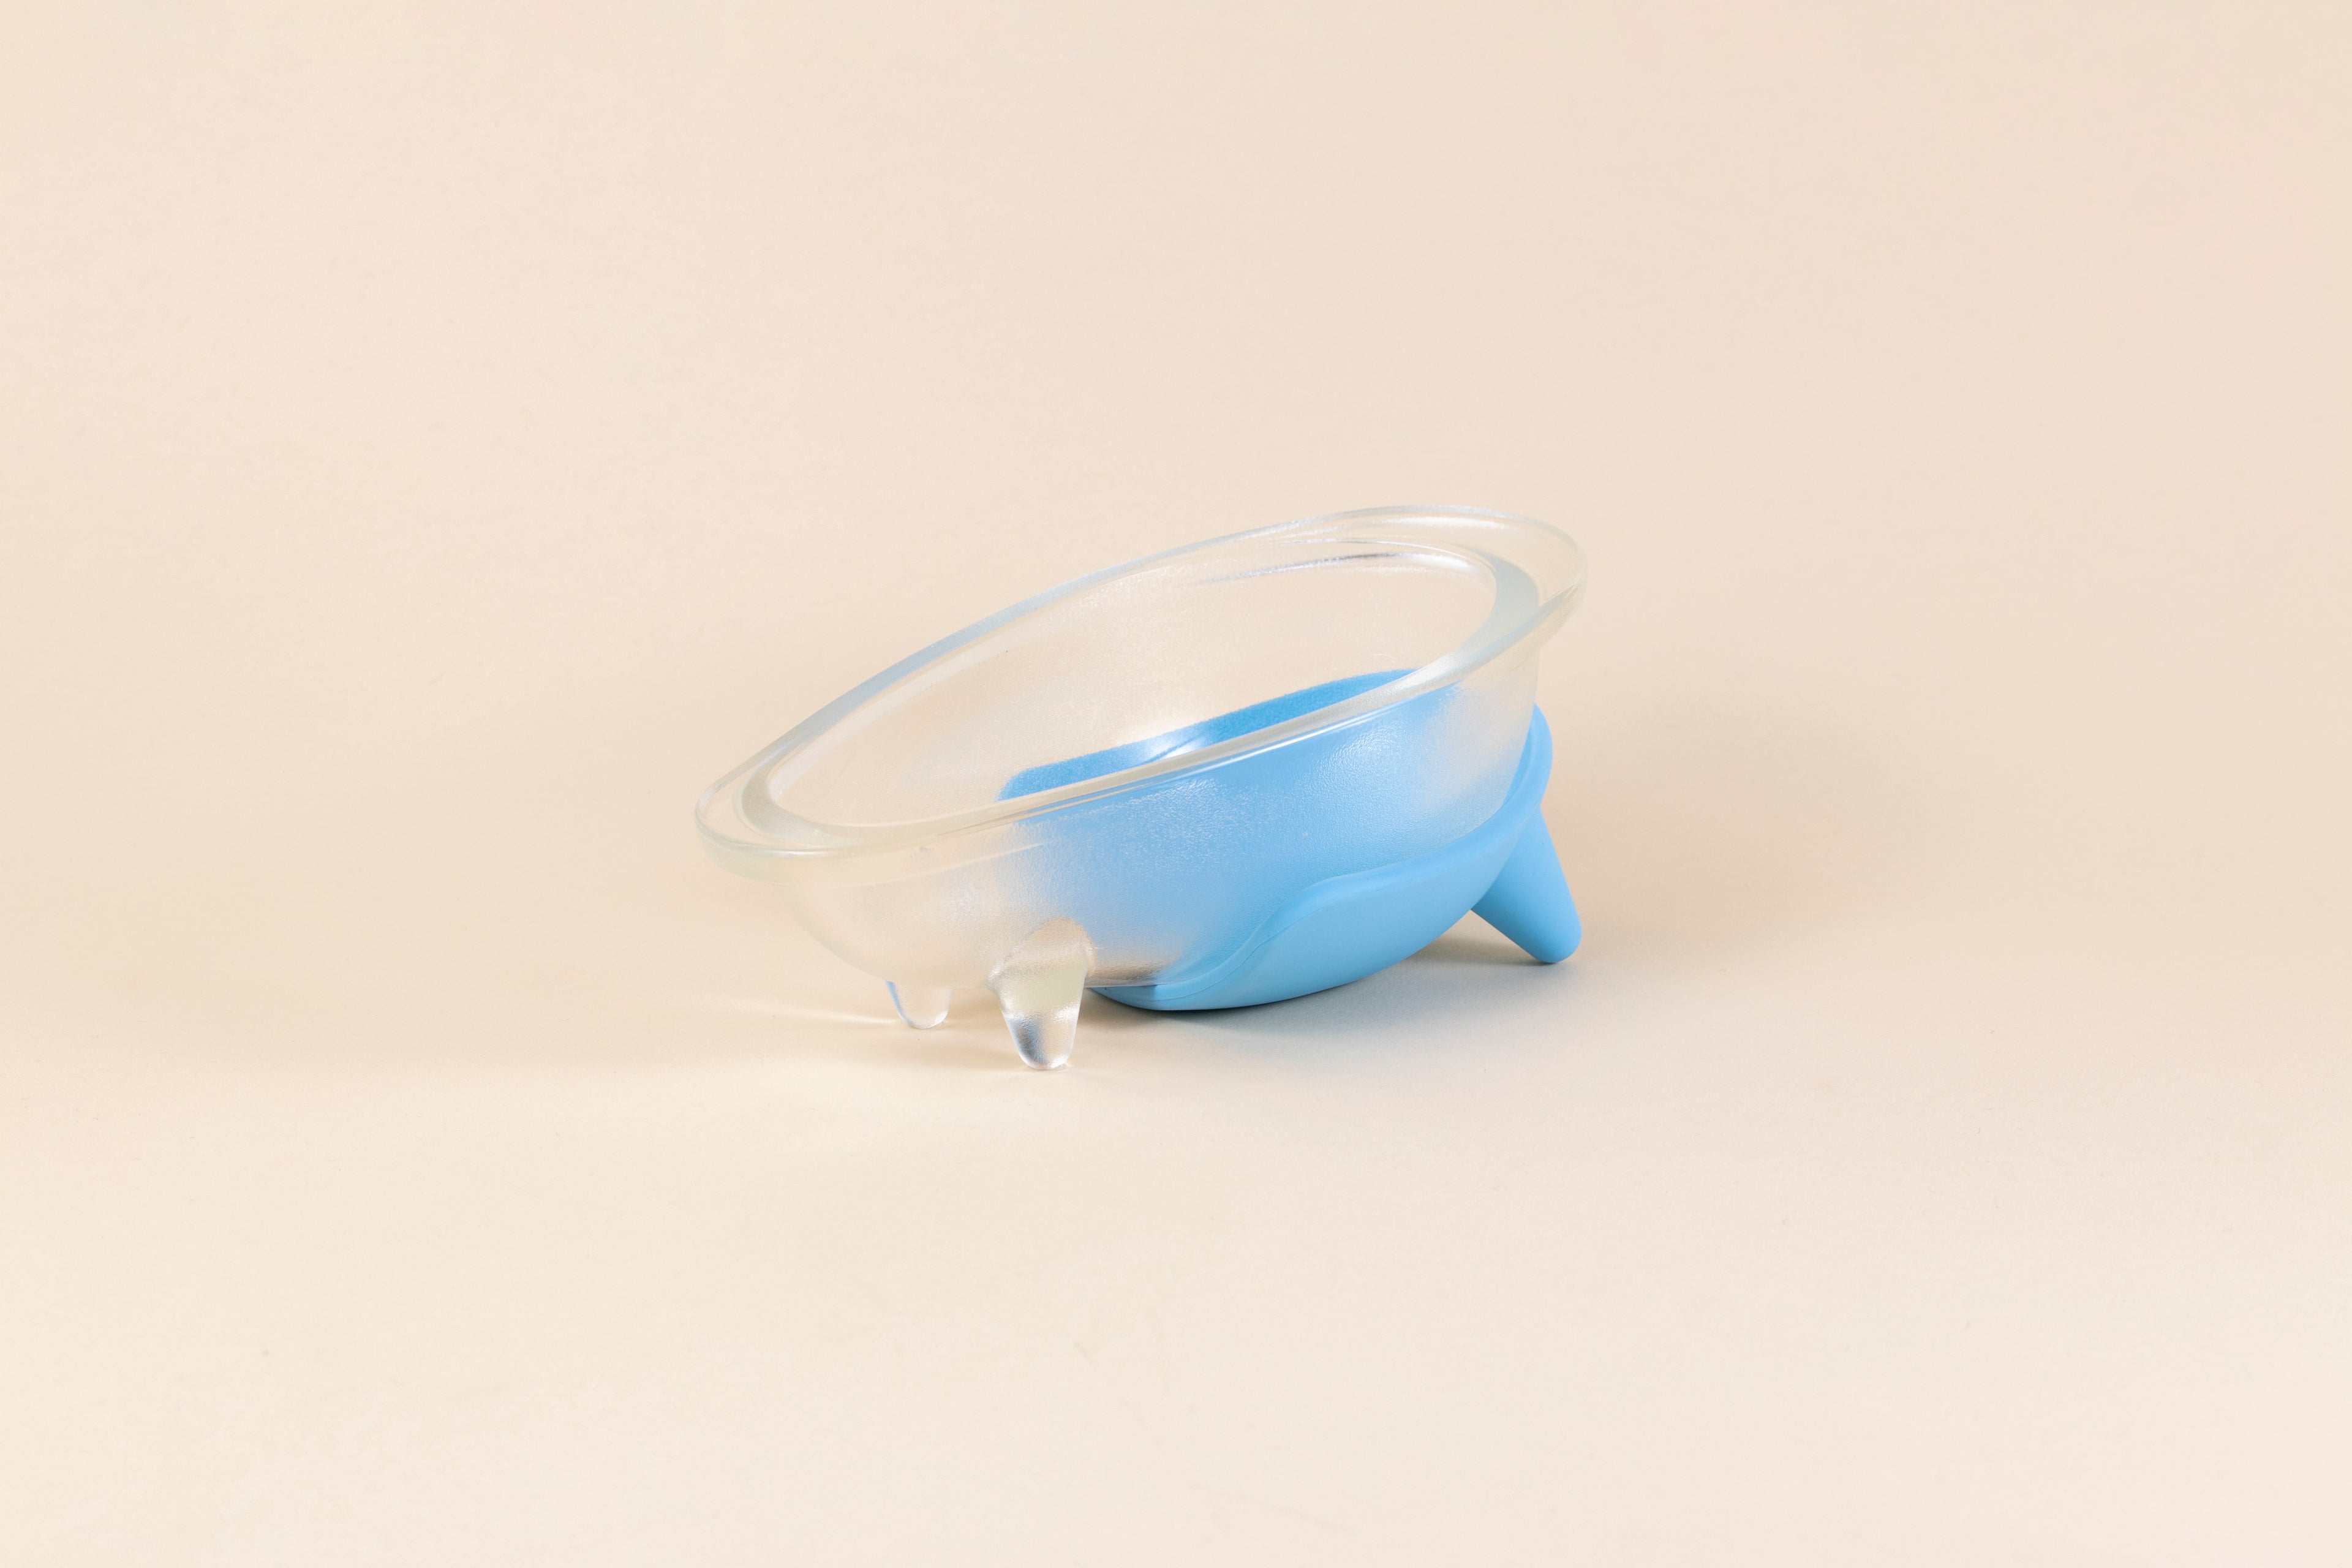 Glass dog bowl shaped like a bathtub with mint blue silicone non-slip mat.